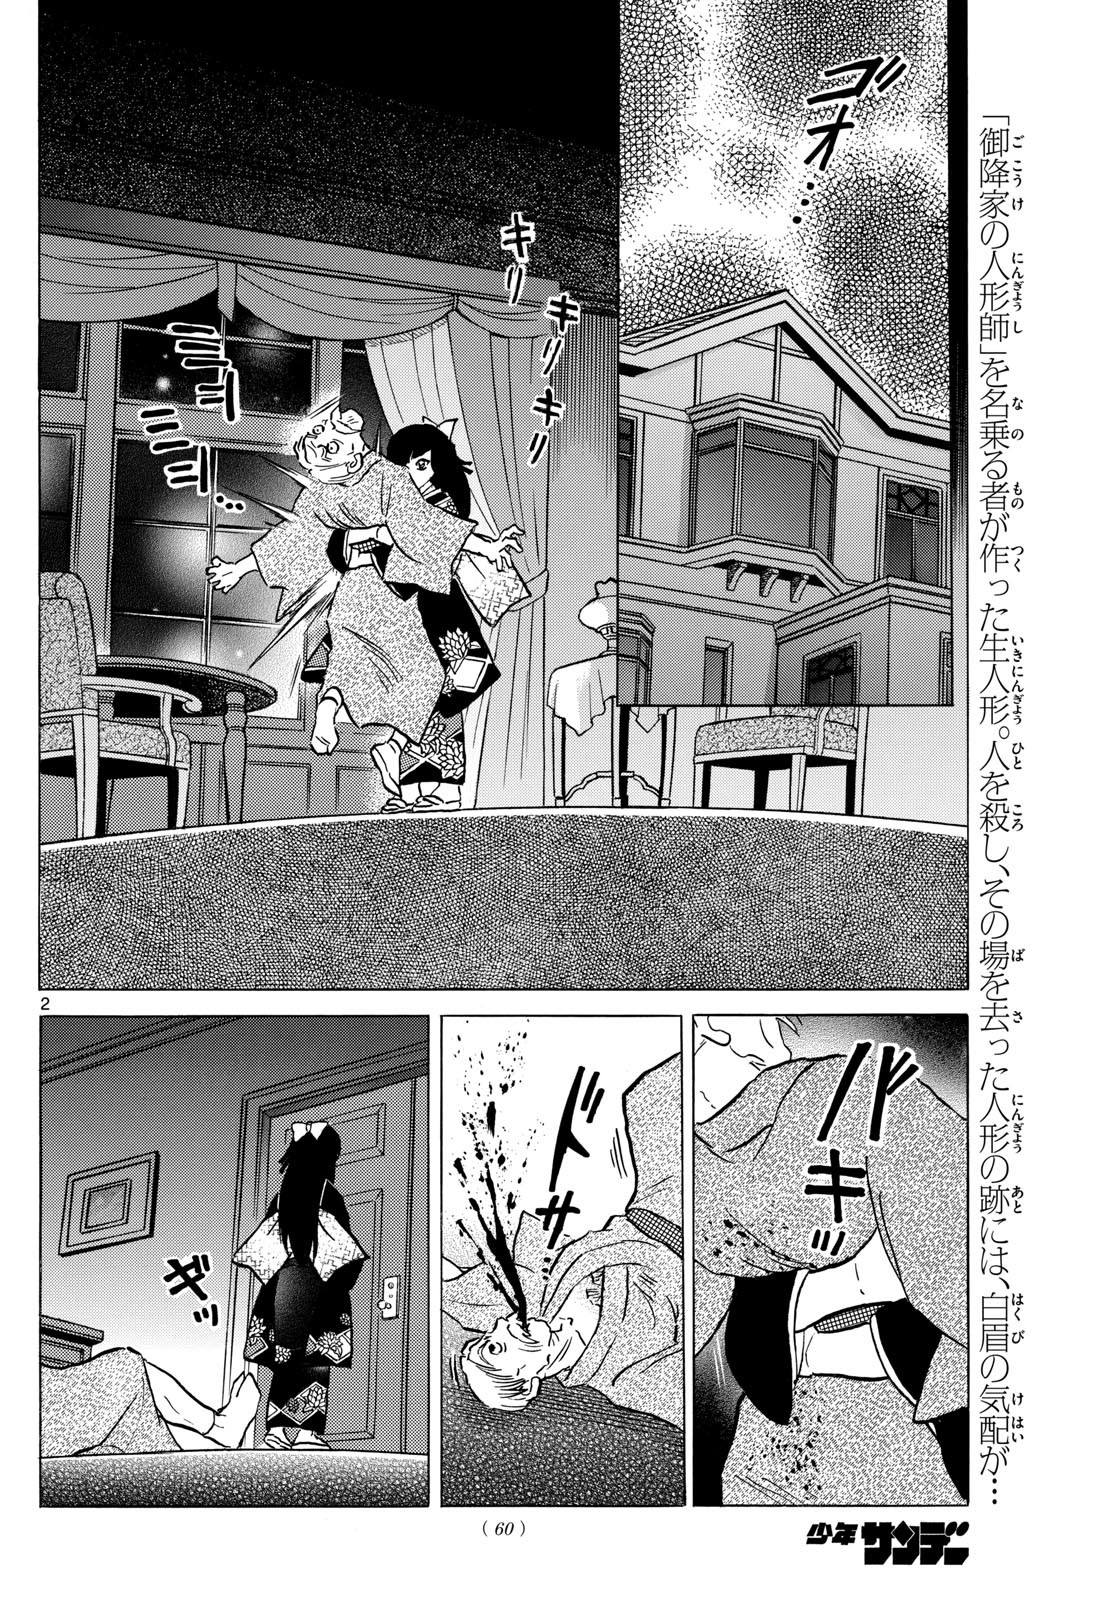 MAO - Chapter 206 - Page 2